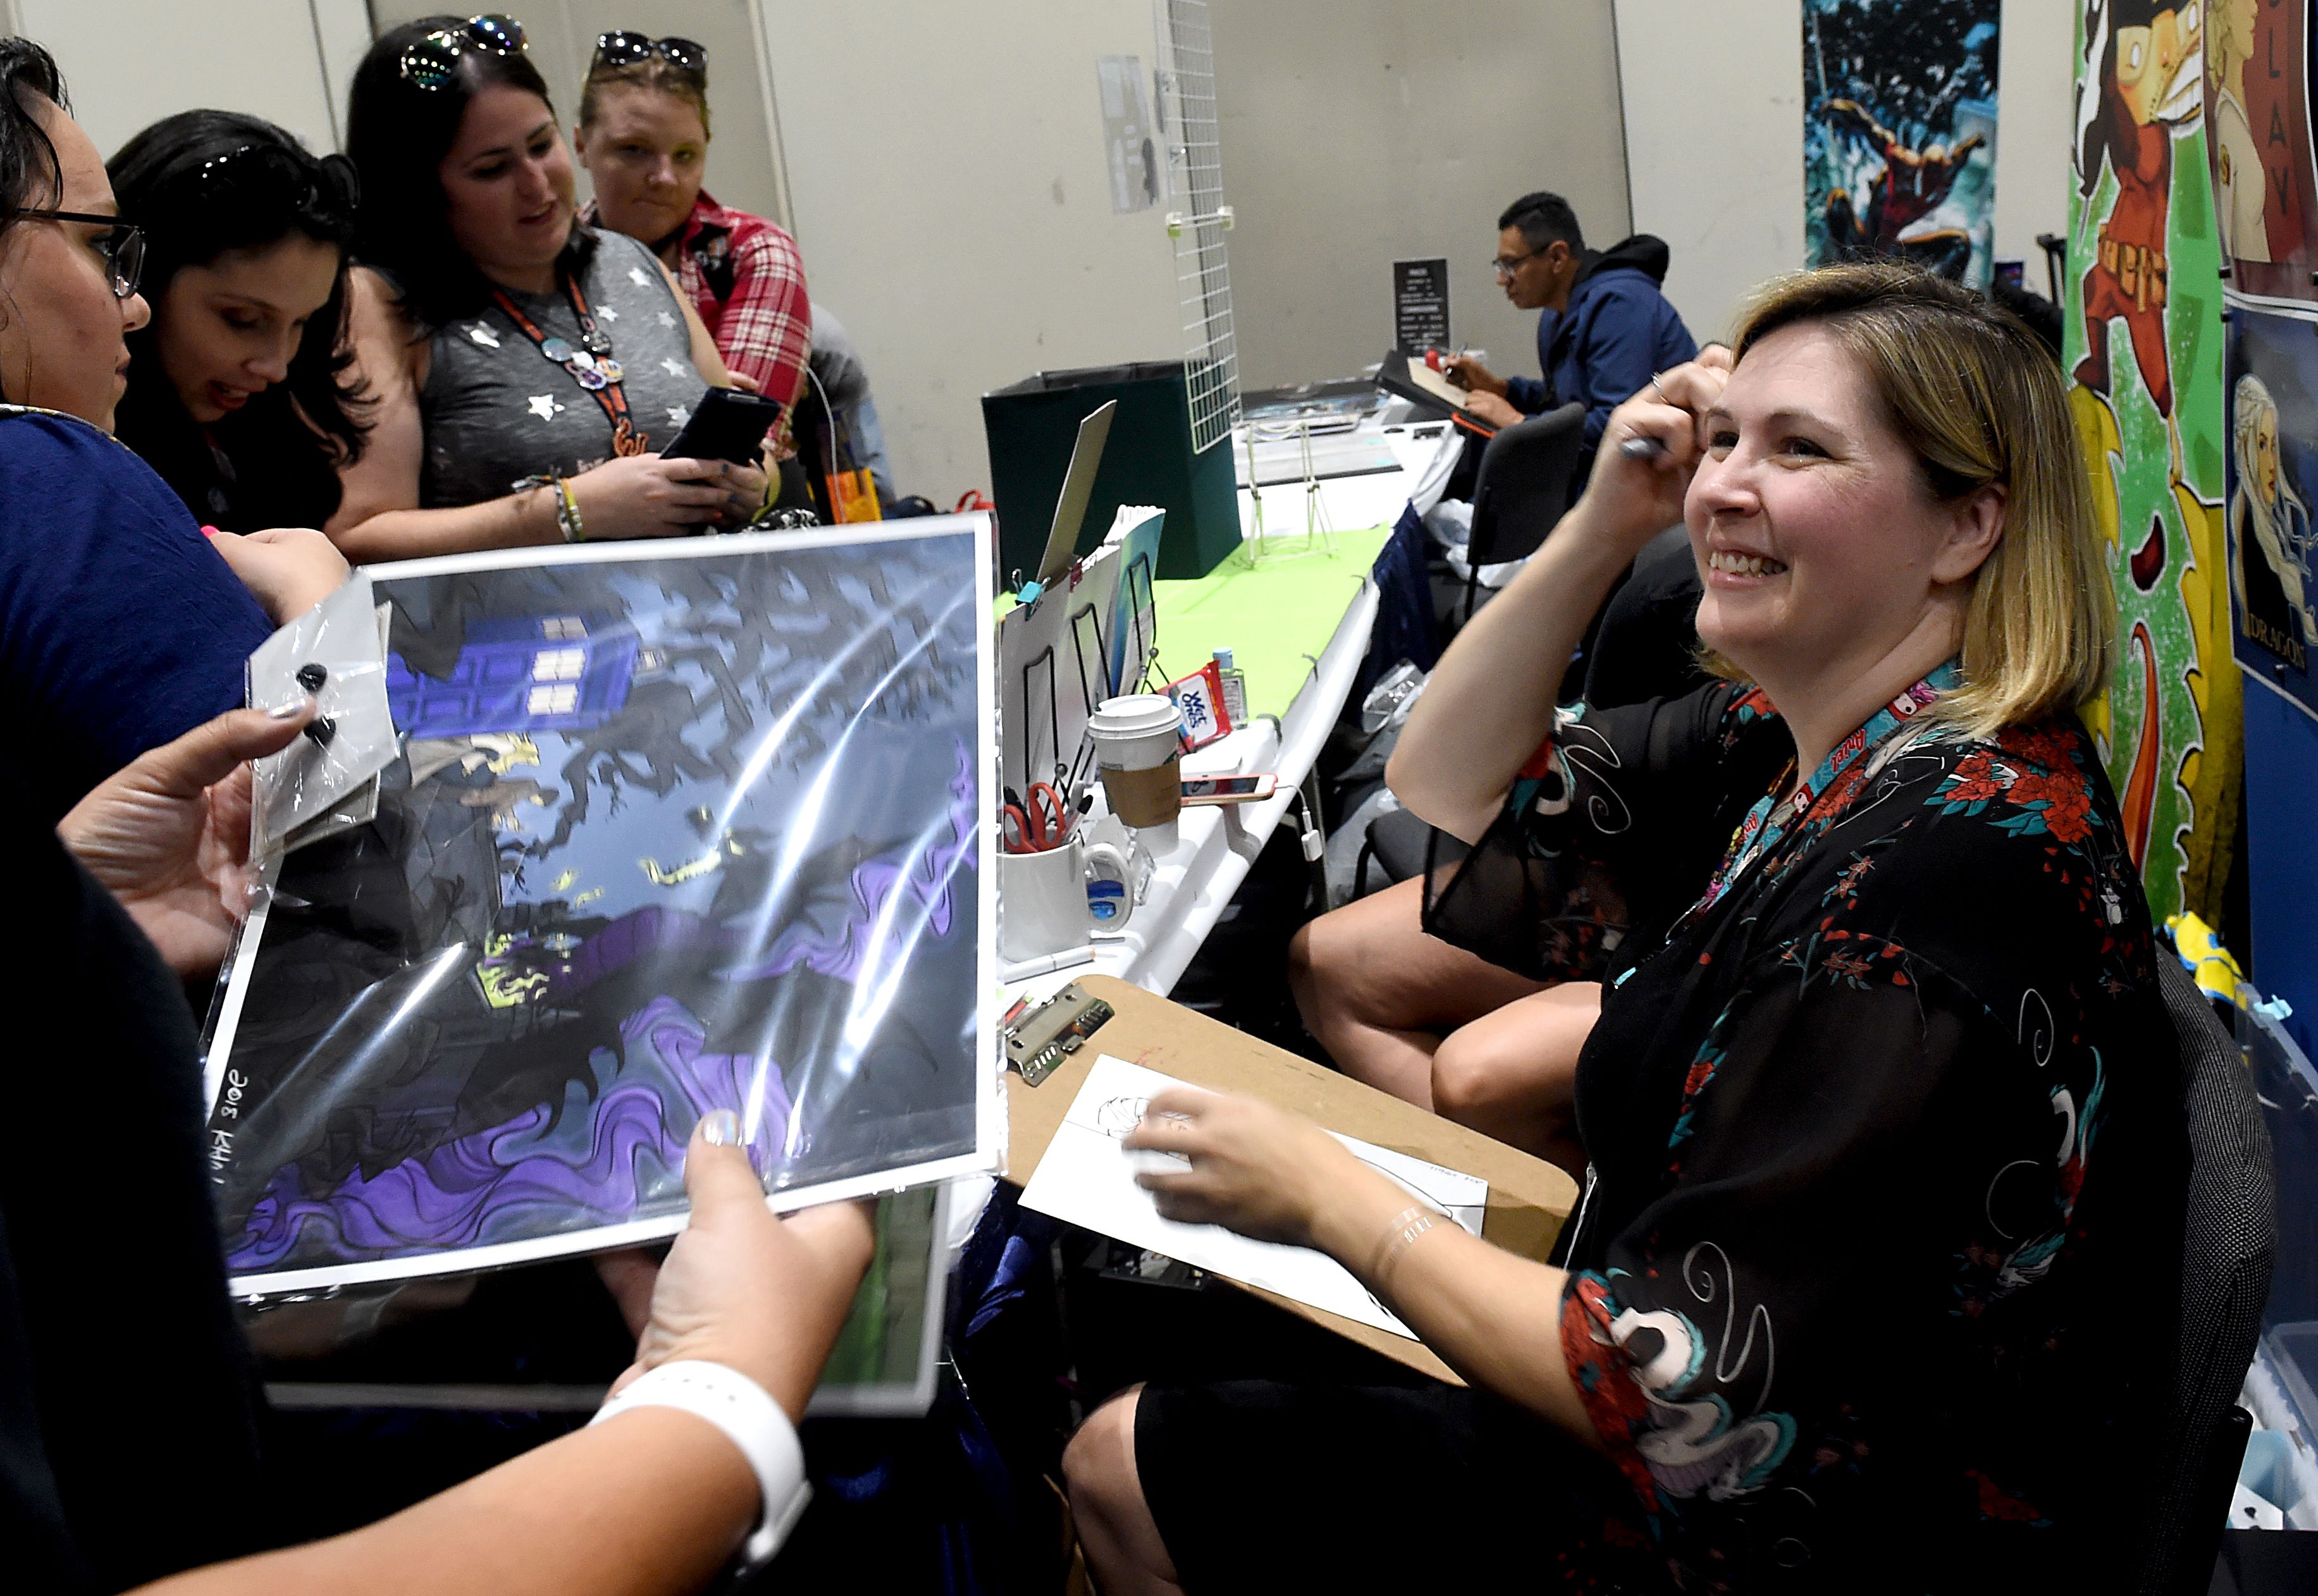 Artists thrive after exhibiting at Artist Alley throughout New York Comedian Con